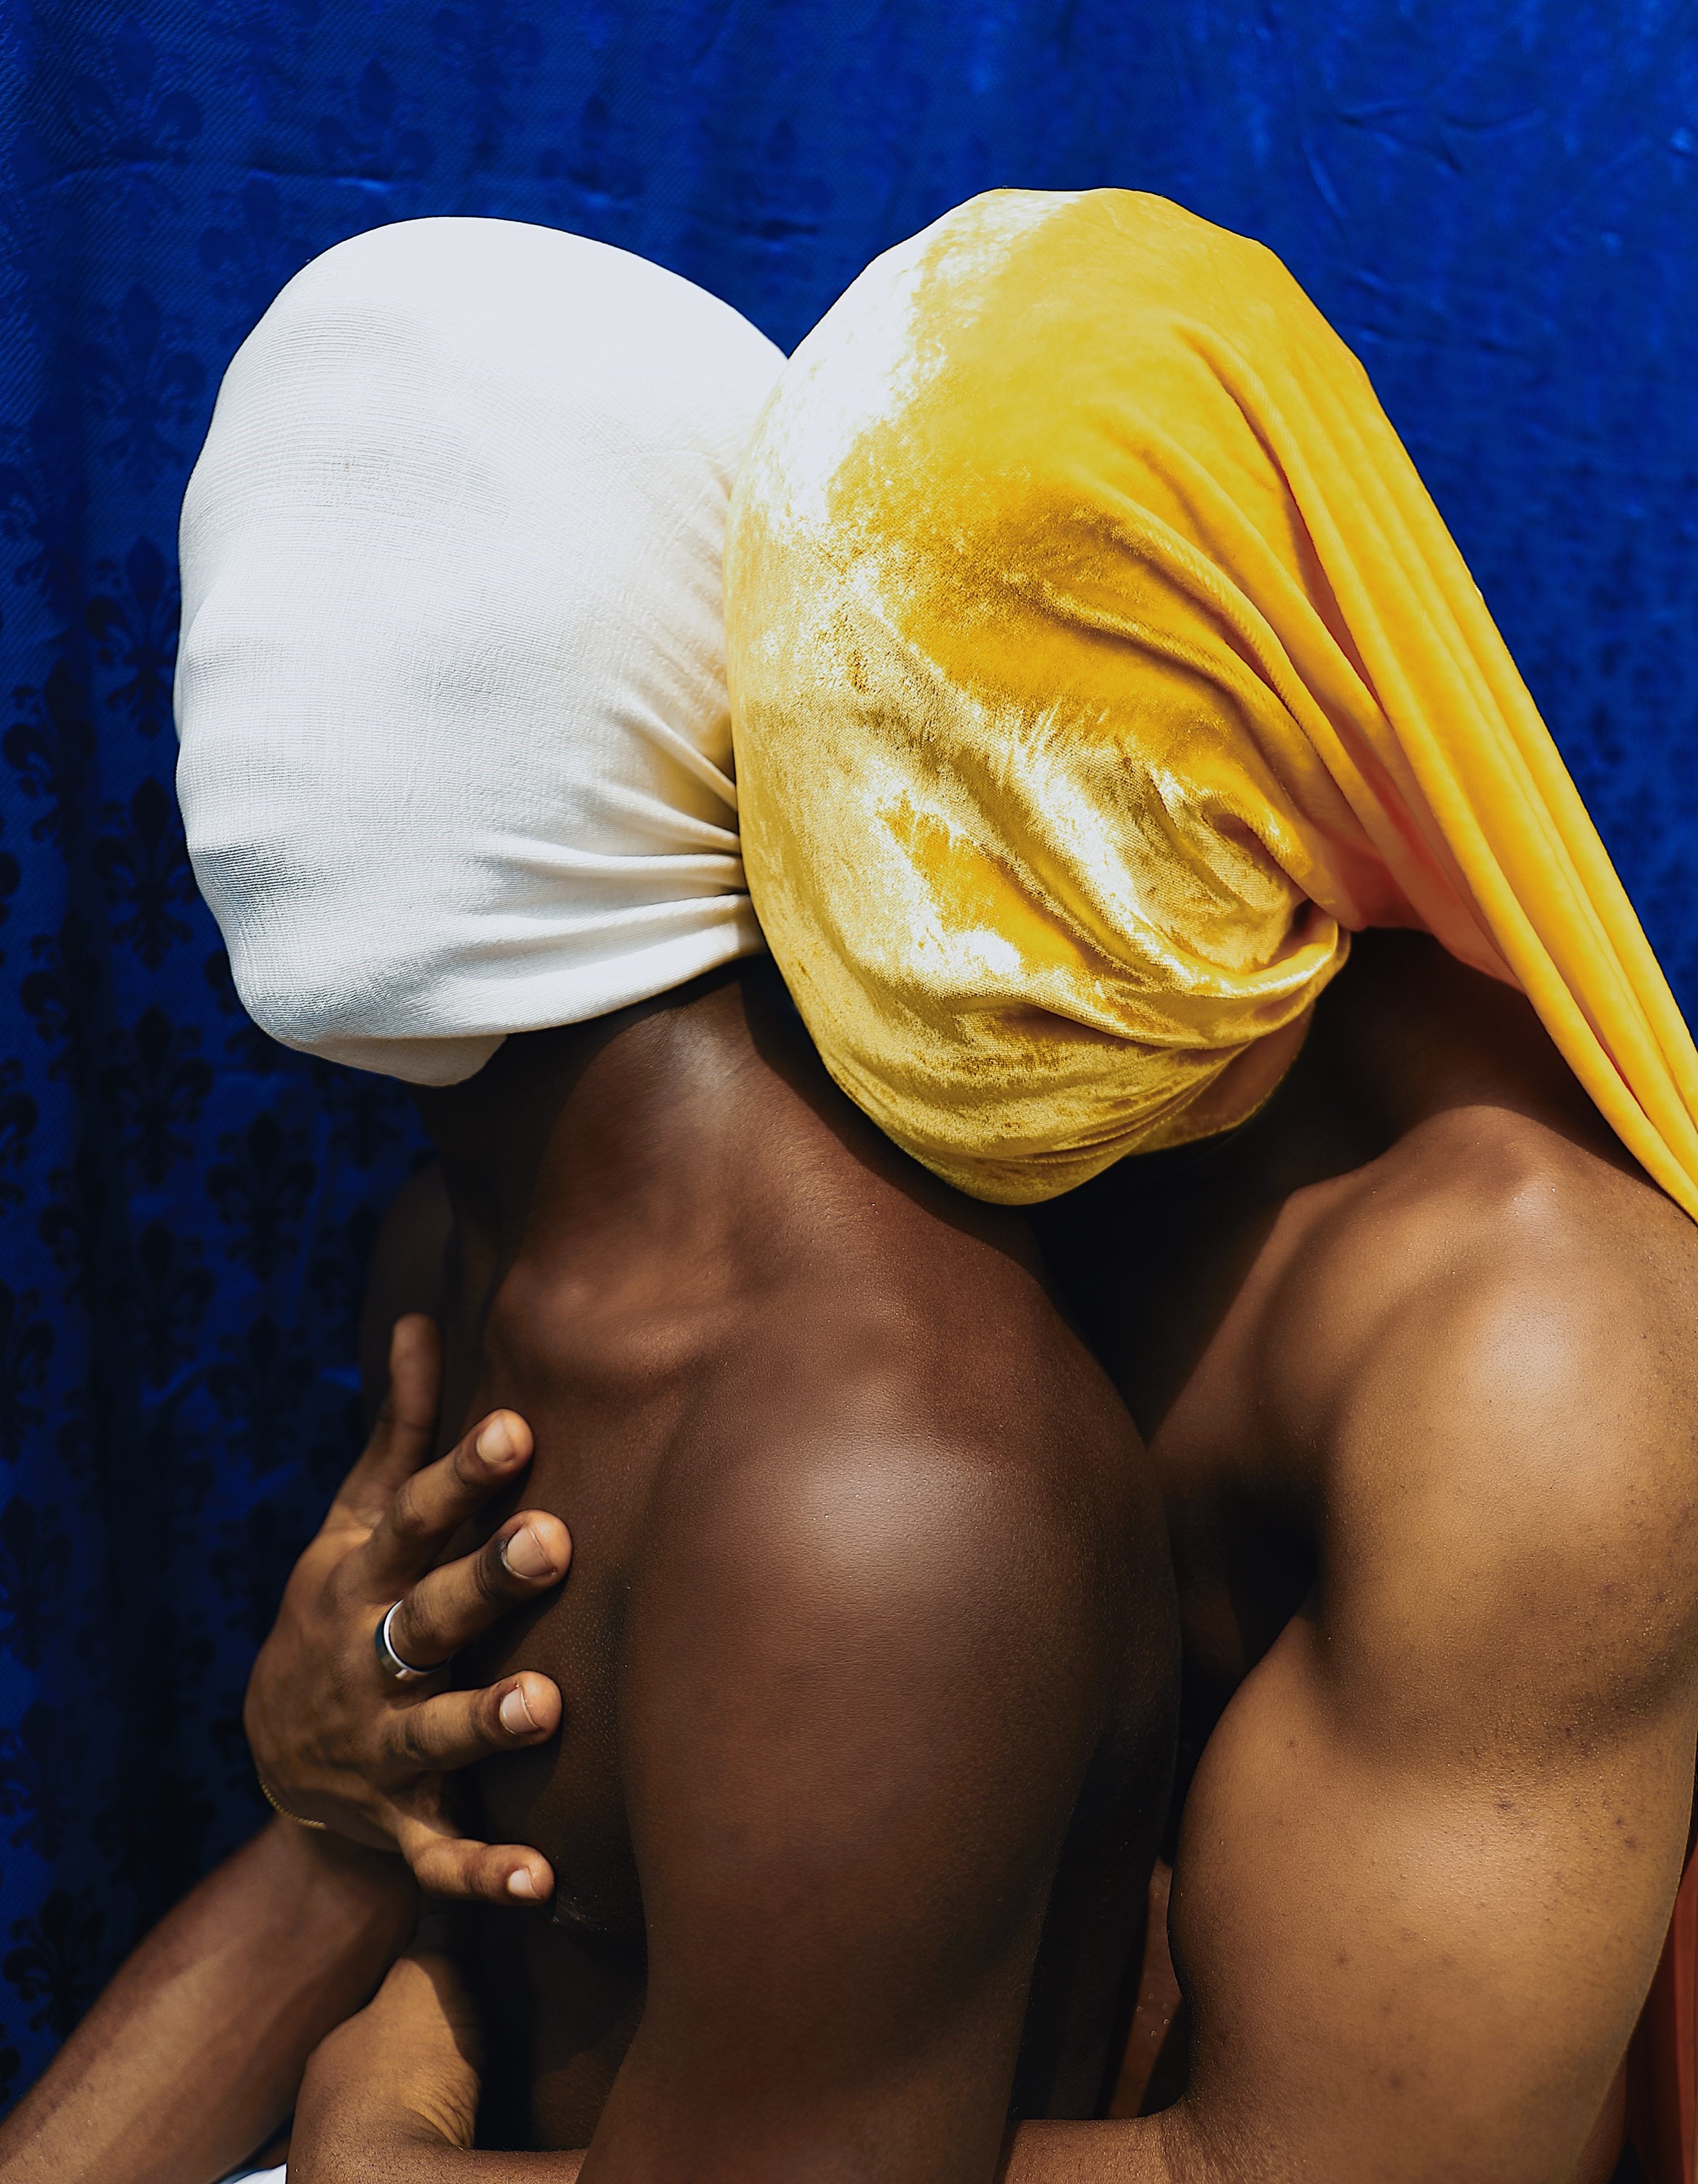 Homosexual Porn Stars - What it's like being a gay porn star in Nigeria | Dazed